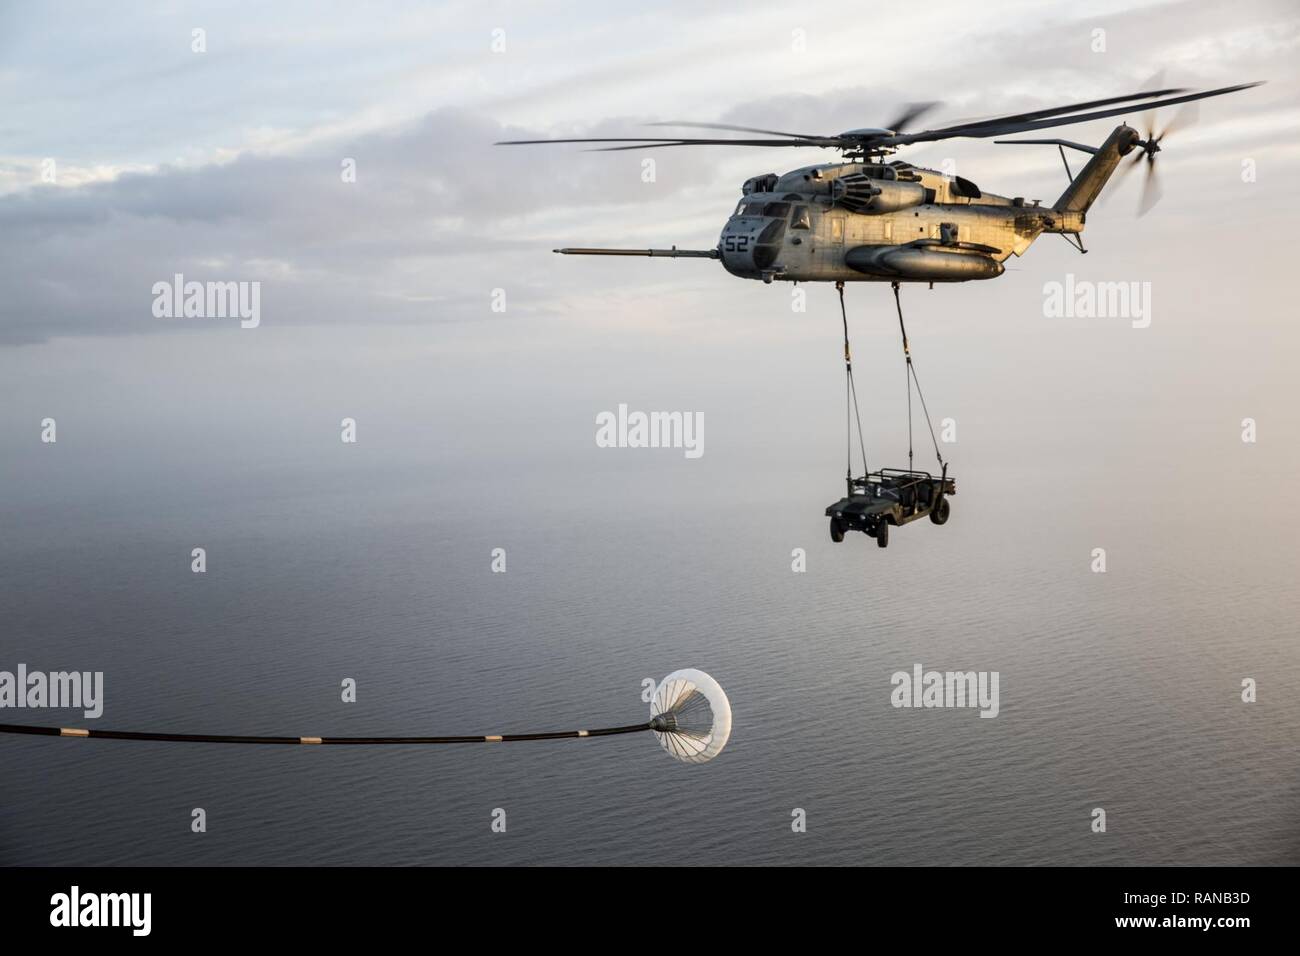 A CH-53 Super Stallion assigned to Marine Heavy Helicopter Squadron (HMH) 464, carries a Humvee during an aerial refueling training operation with Marine Aerial Refueler Transport Squadron (VMGR) 234 on Feb. 23, 2017. VMGR-234 assisted HMH-464 in the training to maintain interoperability. Stock Photo